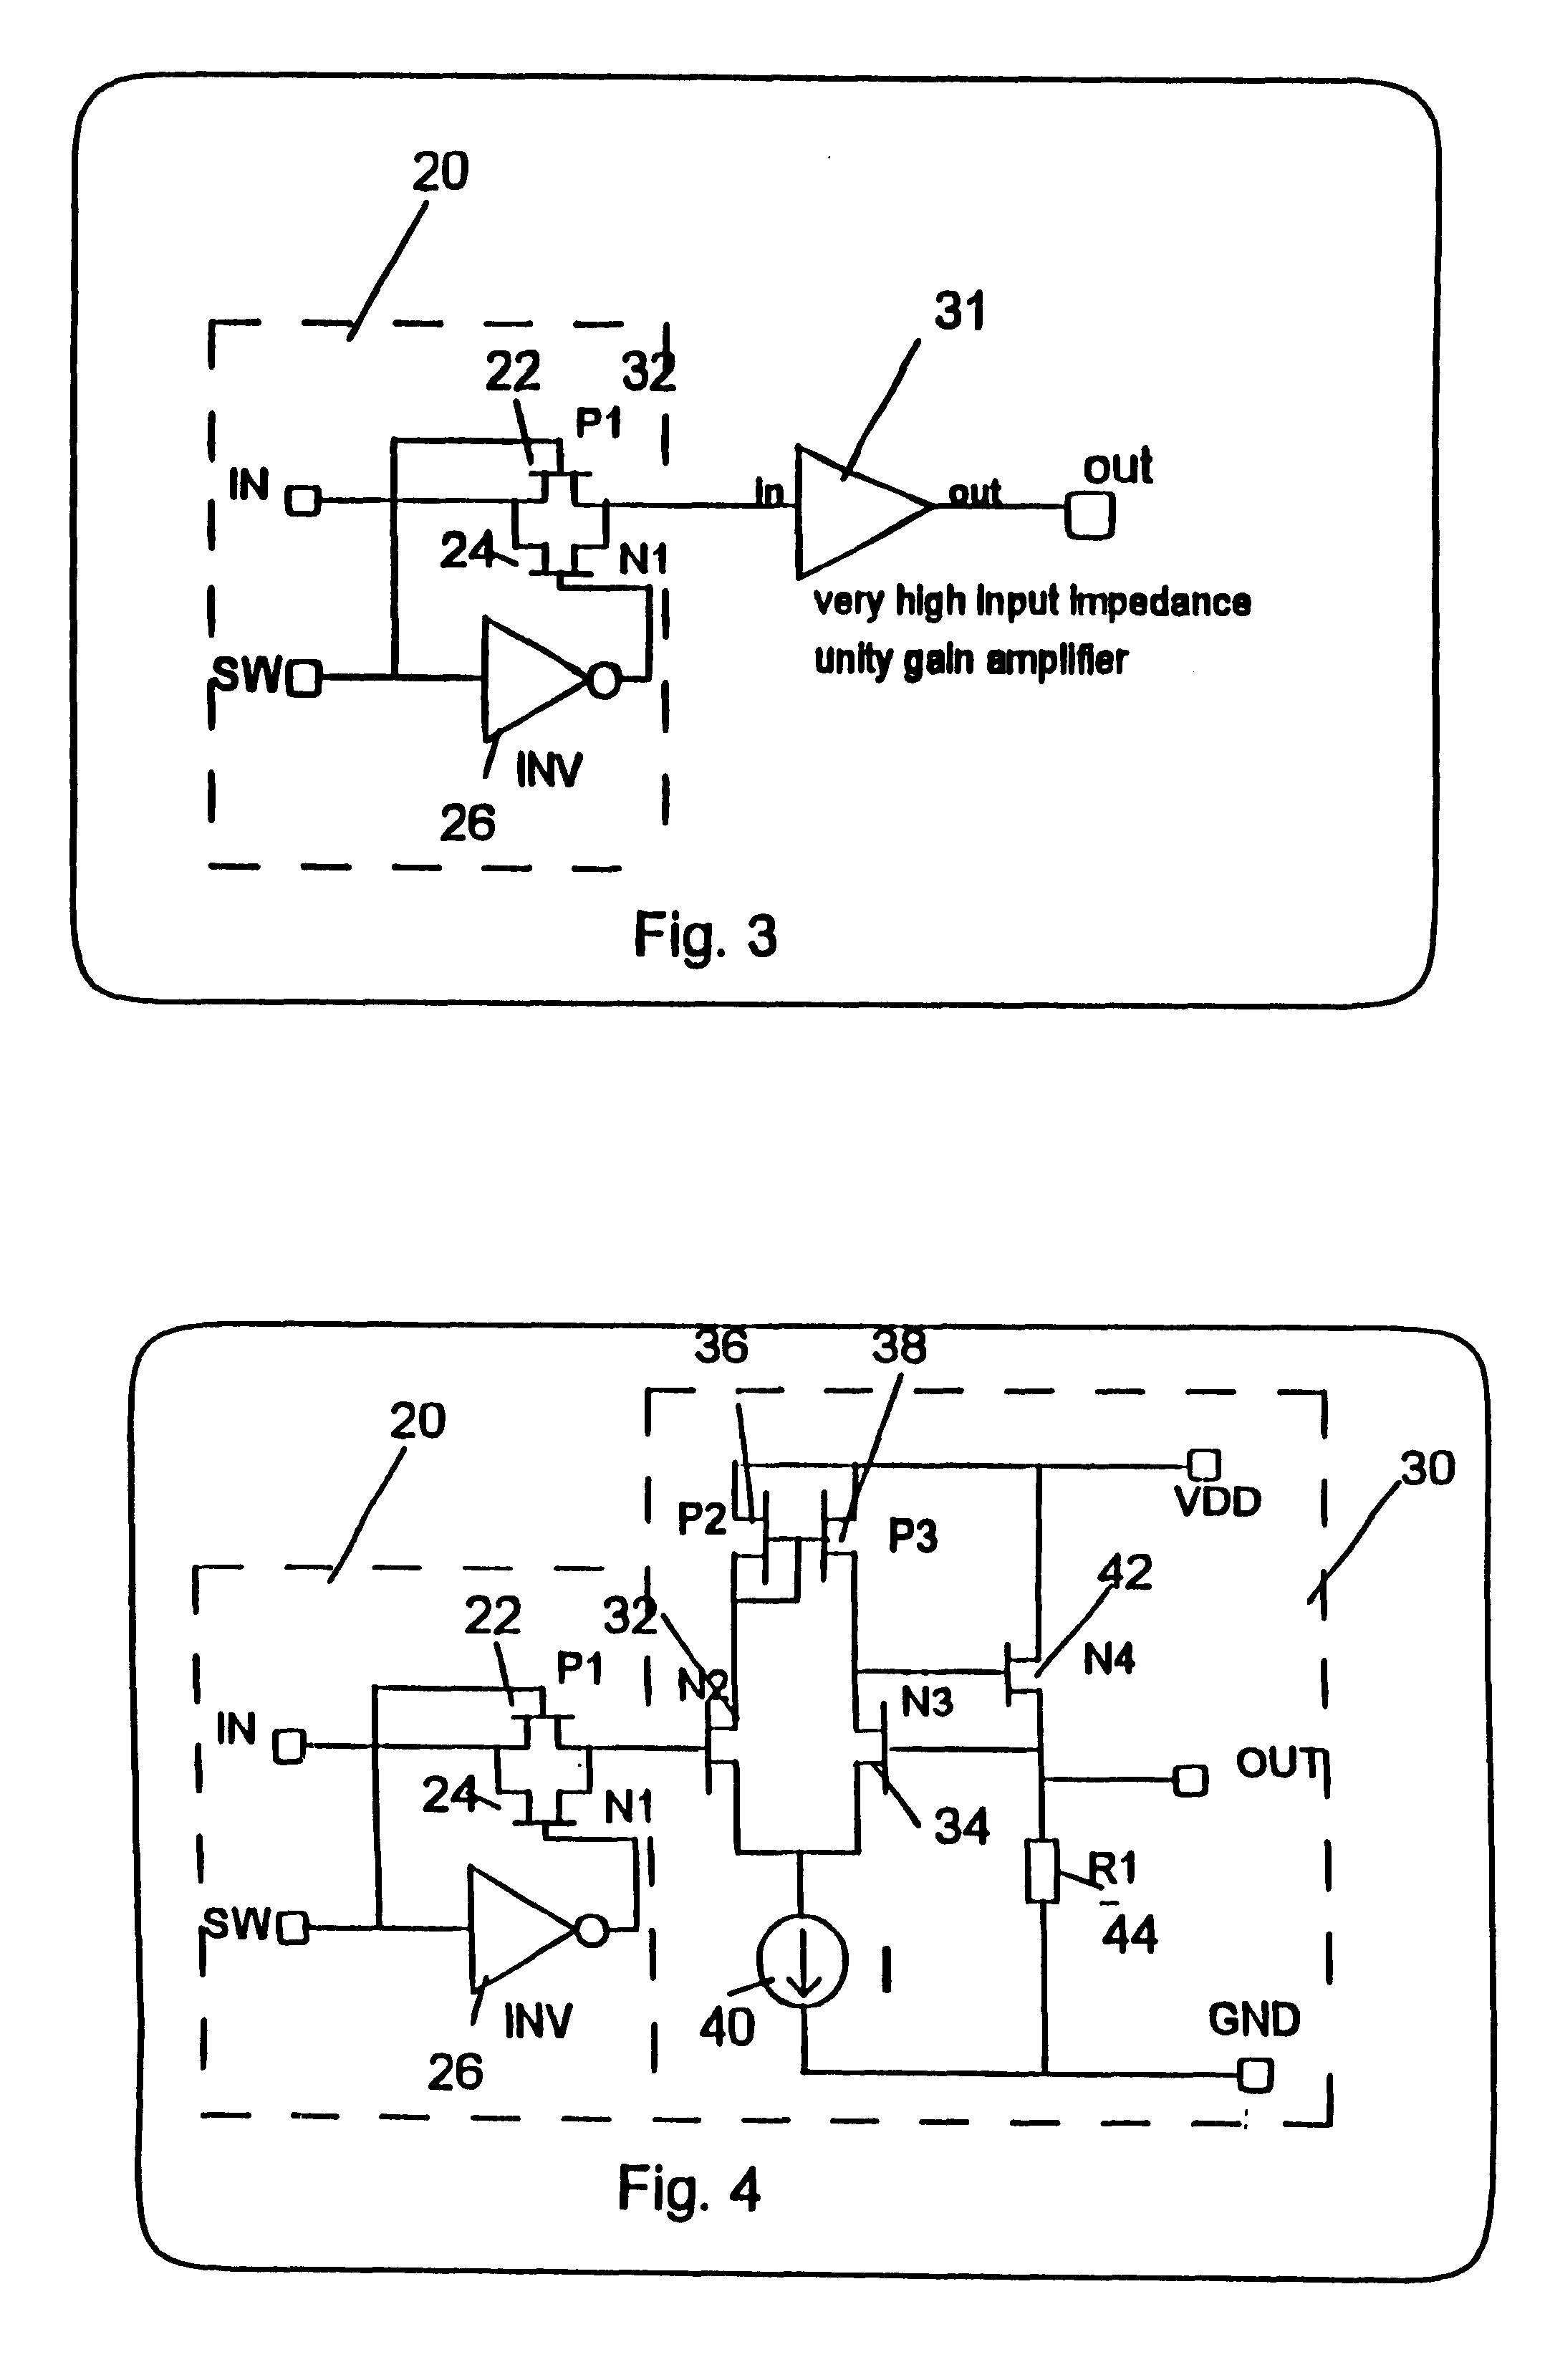 Infrared transreceiver with isolated analog output